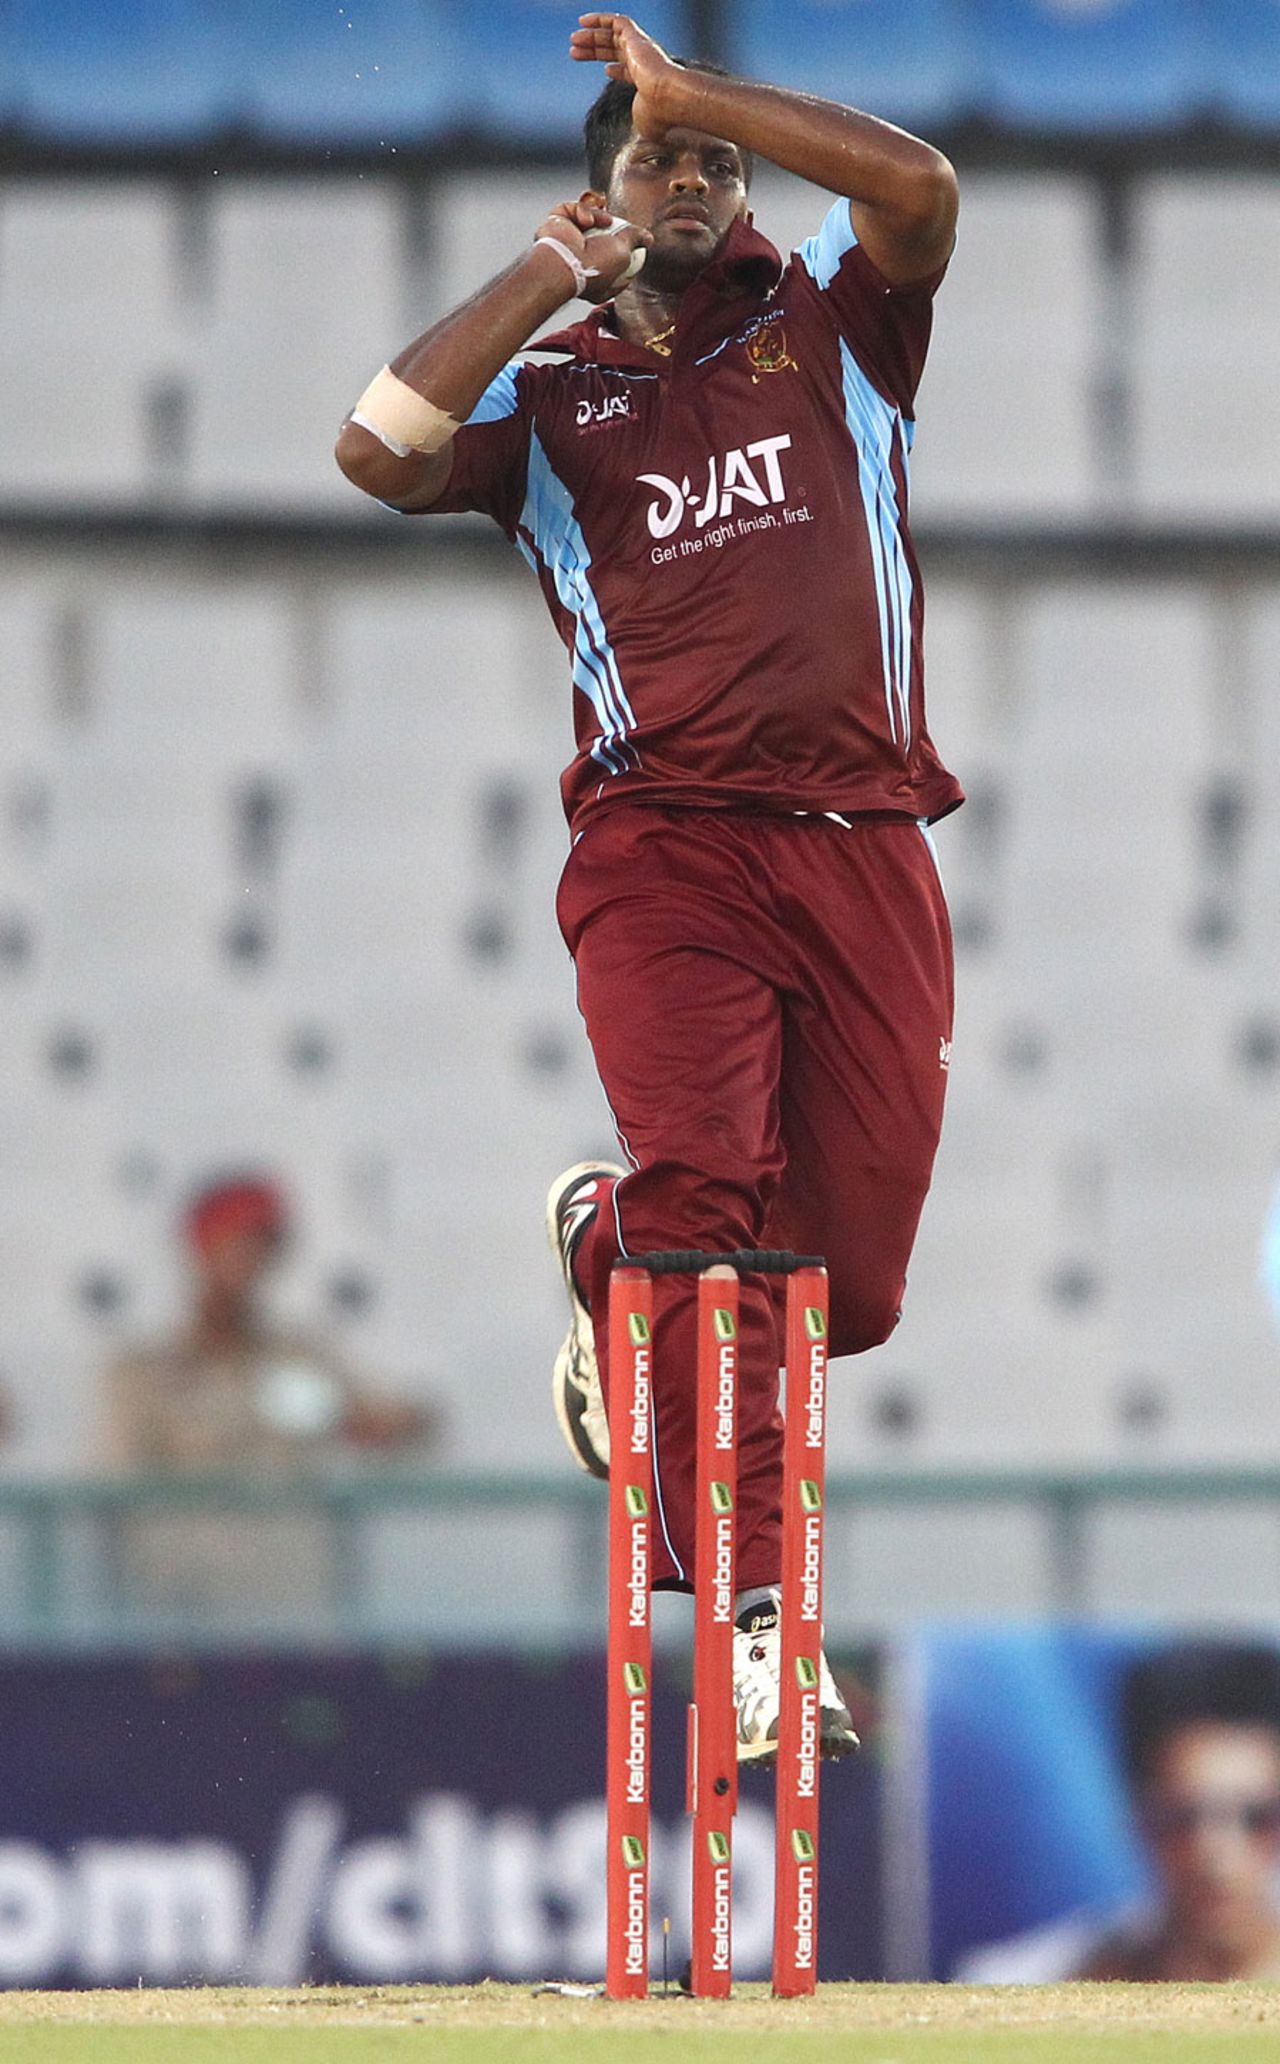 Dilhara Lokuhettige in his delivery stride, Kandurata Maroons v Otago Volts, Champions League Qualifiers, Mohali, September 18, 2013